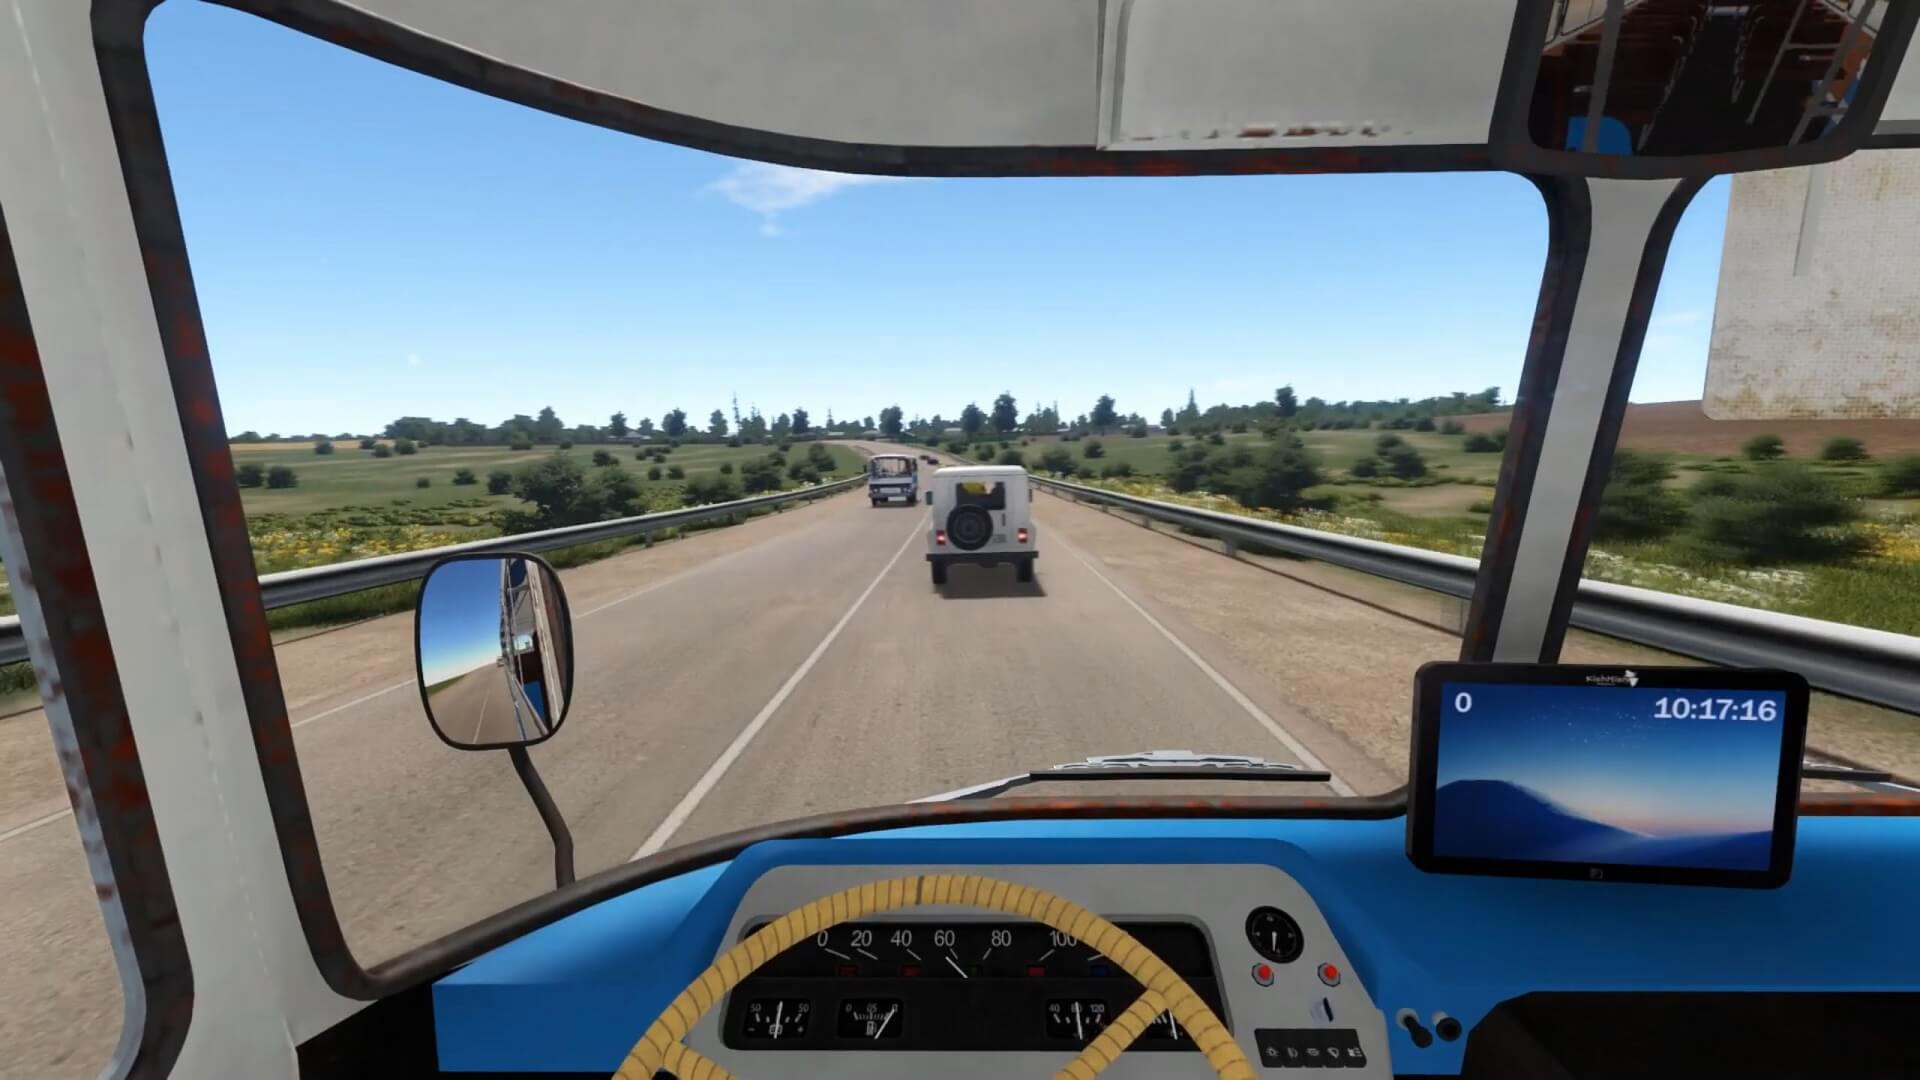 Bus Driver Simulator, another of KishMish Games' titles (along with Fly Corp) that was removed from Steam for seemingly no reason